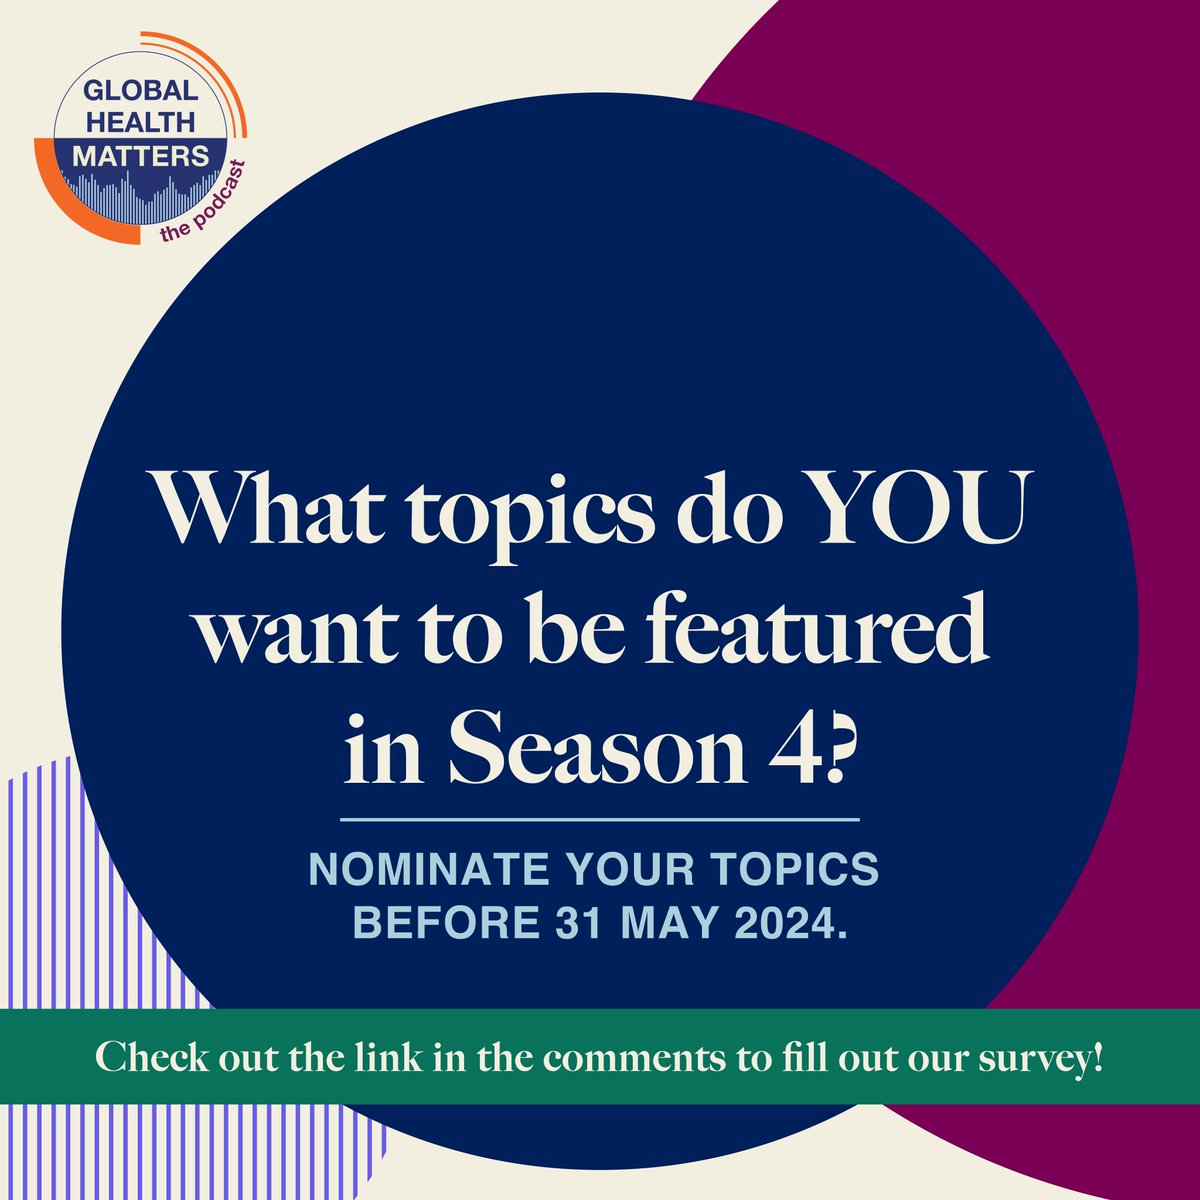 We want to hear from our listeners! Tell us what topics you would like to hear discussed on #GlobalHealthMatters. Nominate a Season 4 episode topic by 31 May 2024 here👉 form.jotform.com/241084336342047